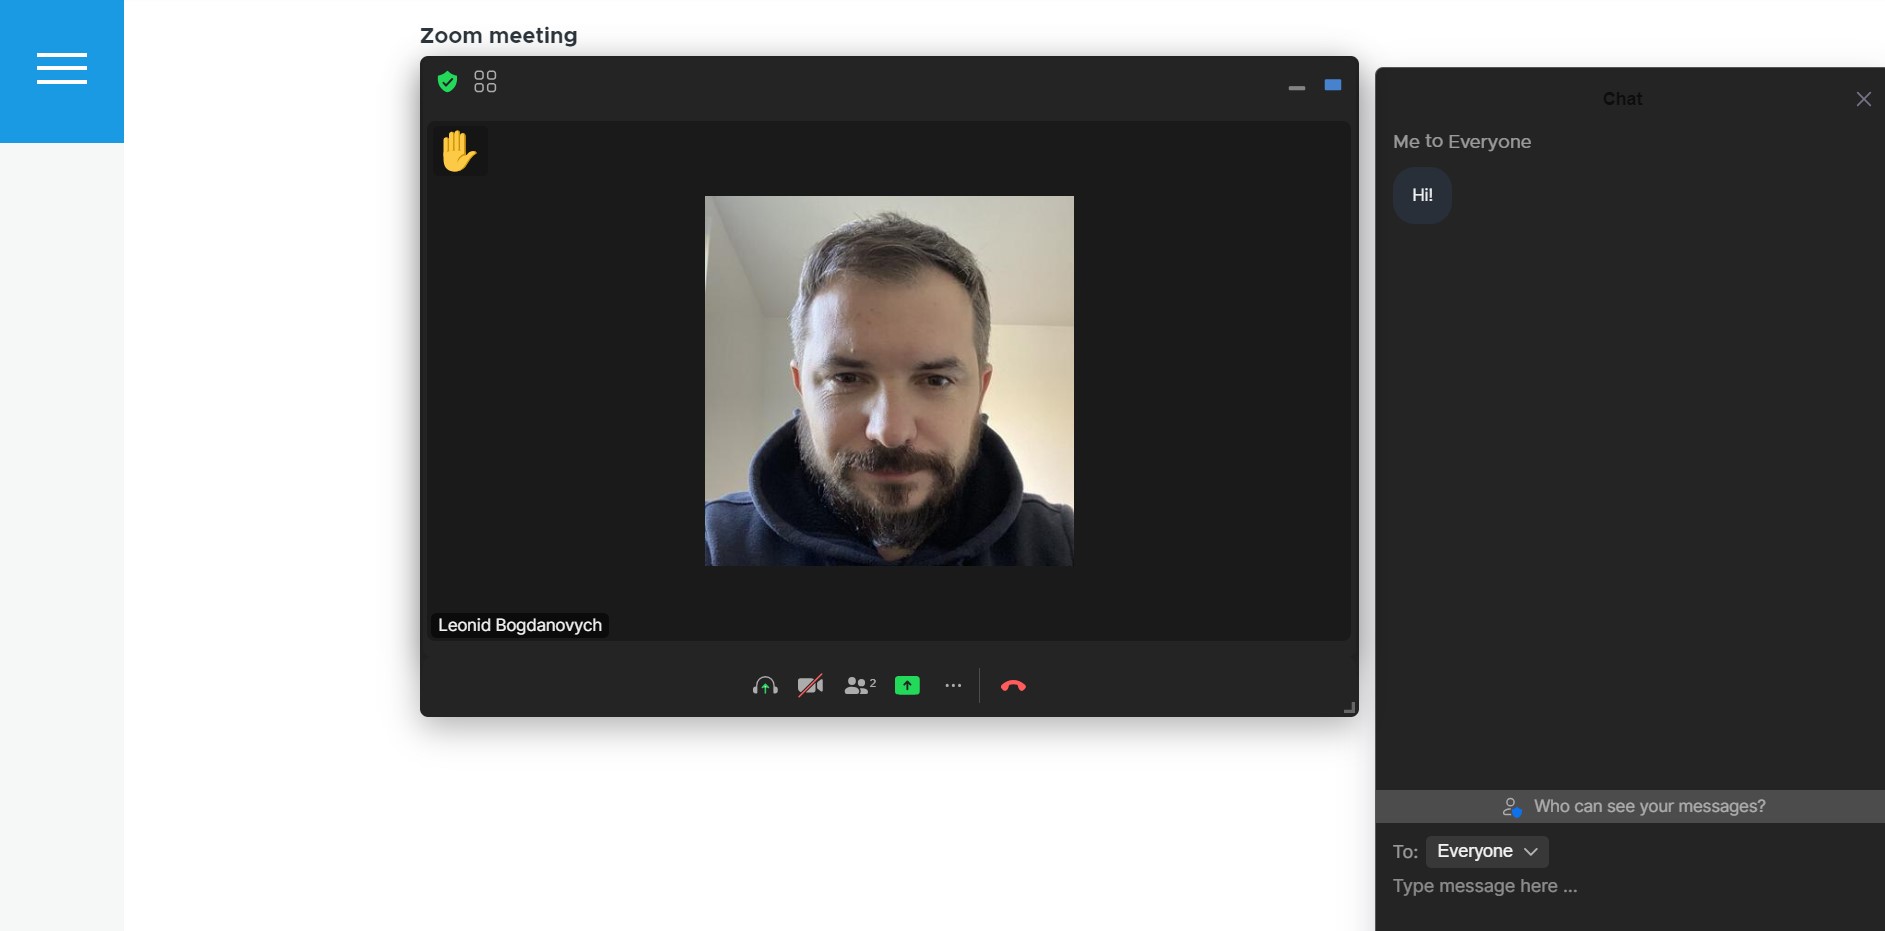 Joining a Zoom meeting from a Drupal page with the chat window open.